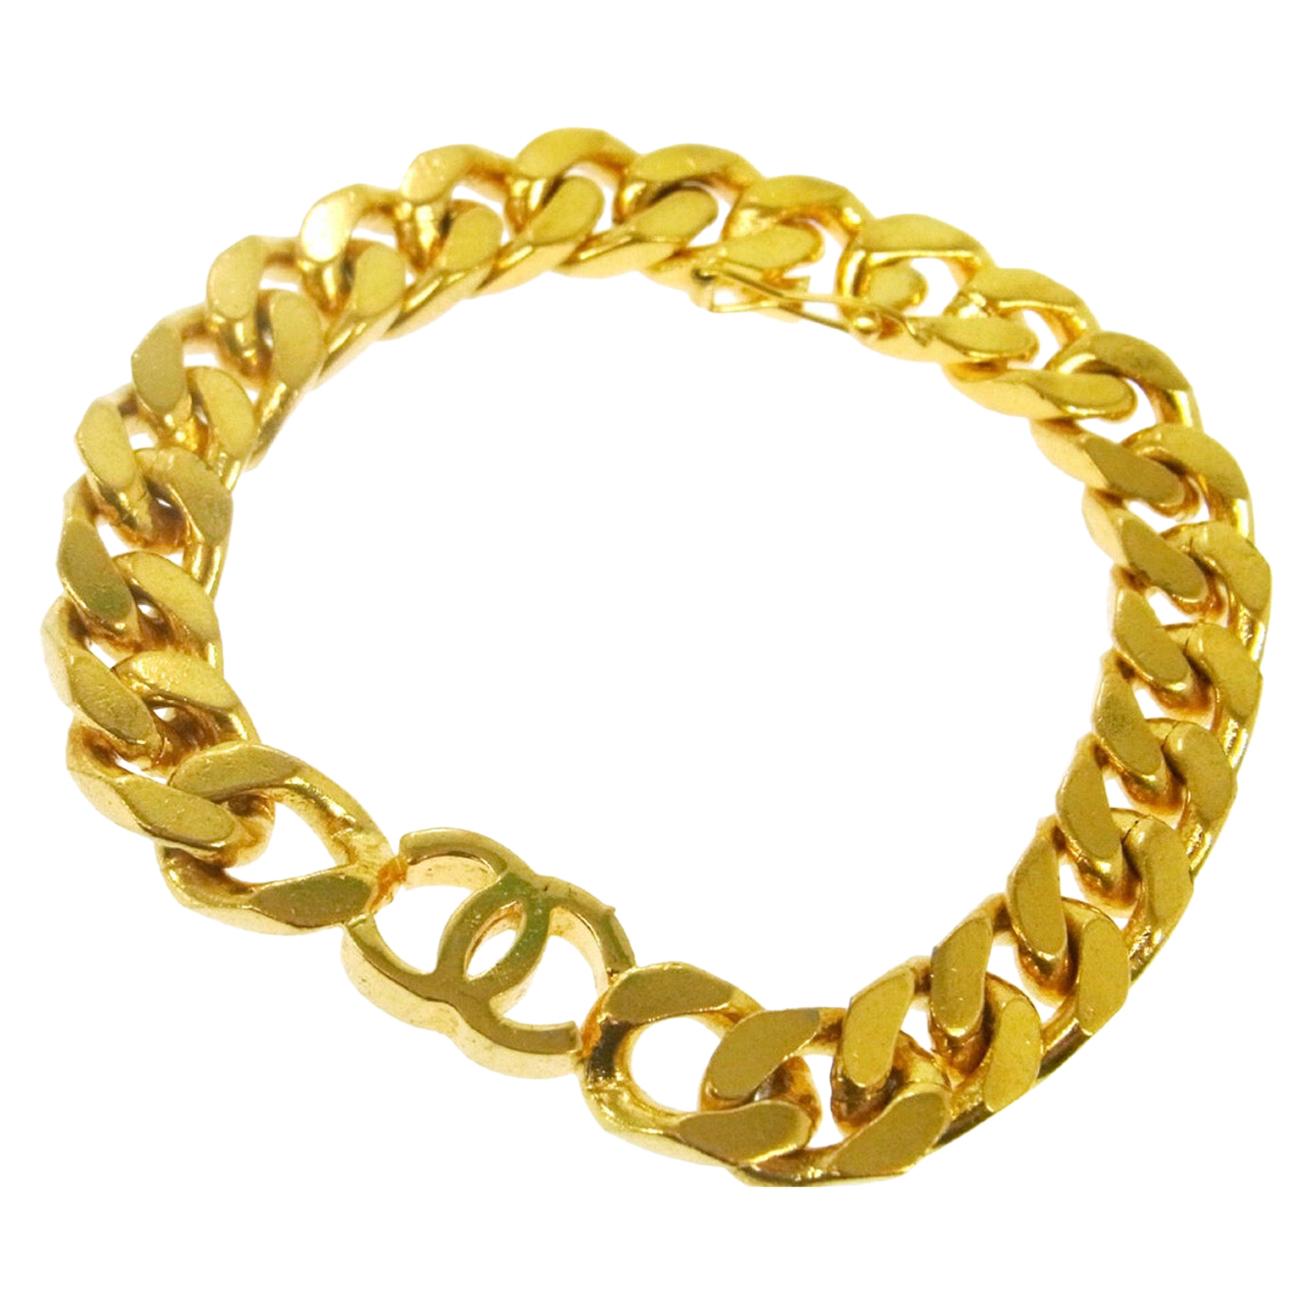 Chanel Gold Chain Thin Link Small CC Charm Evening Cuff Bracelet 